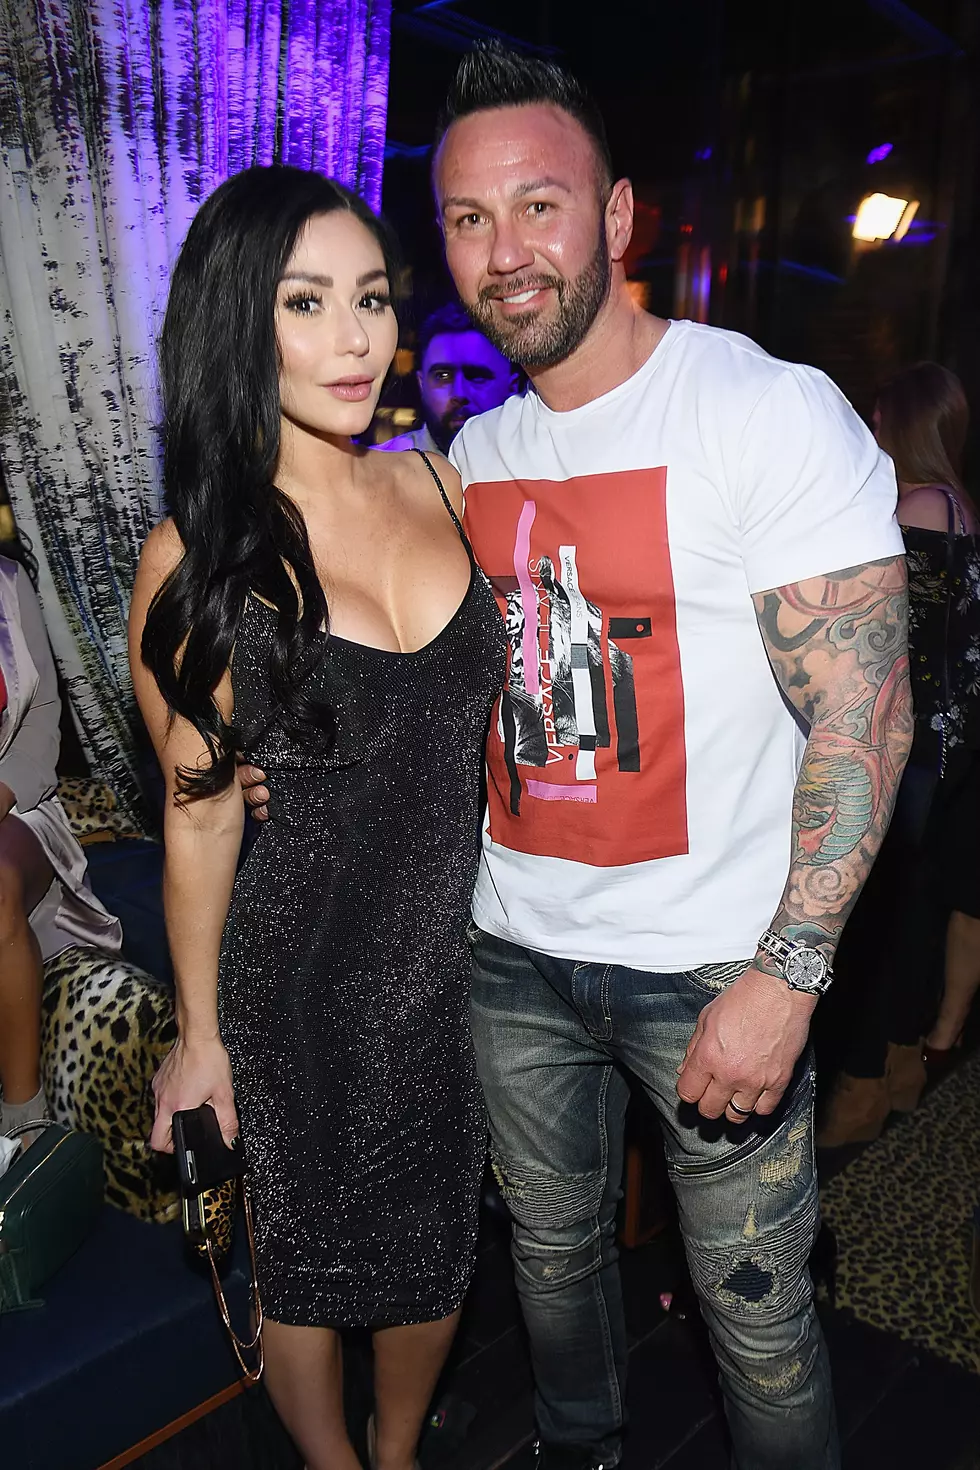 JWoww Already With New, Younger Man Before Divorce Even Final